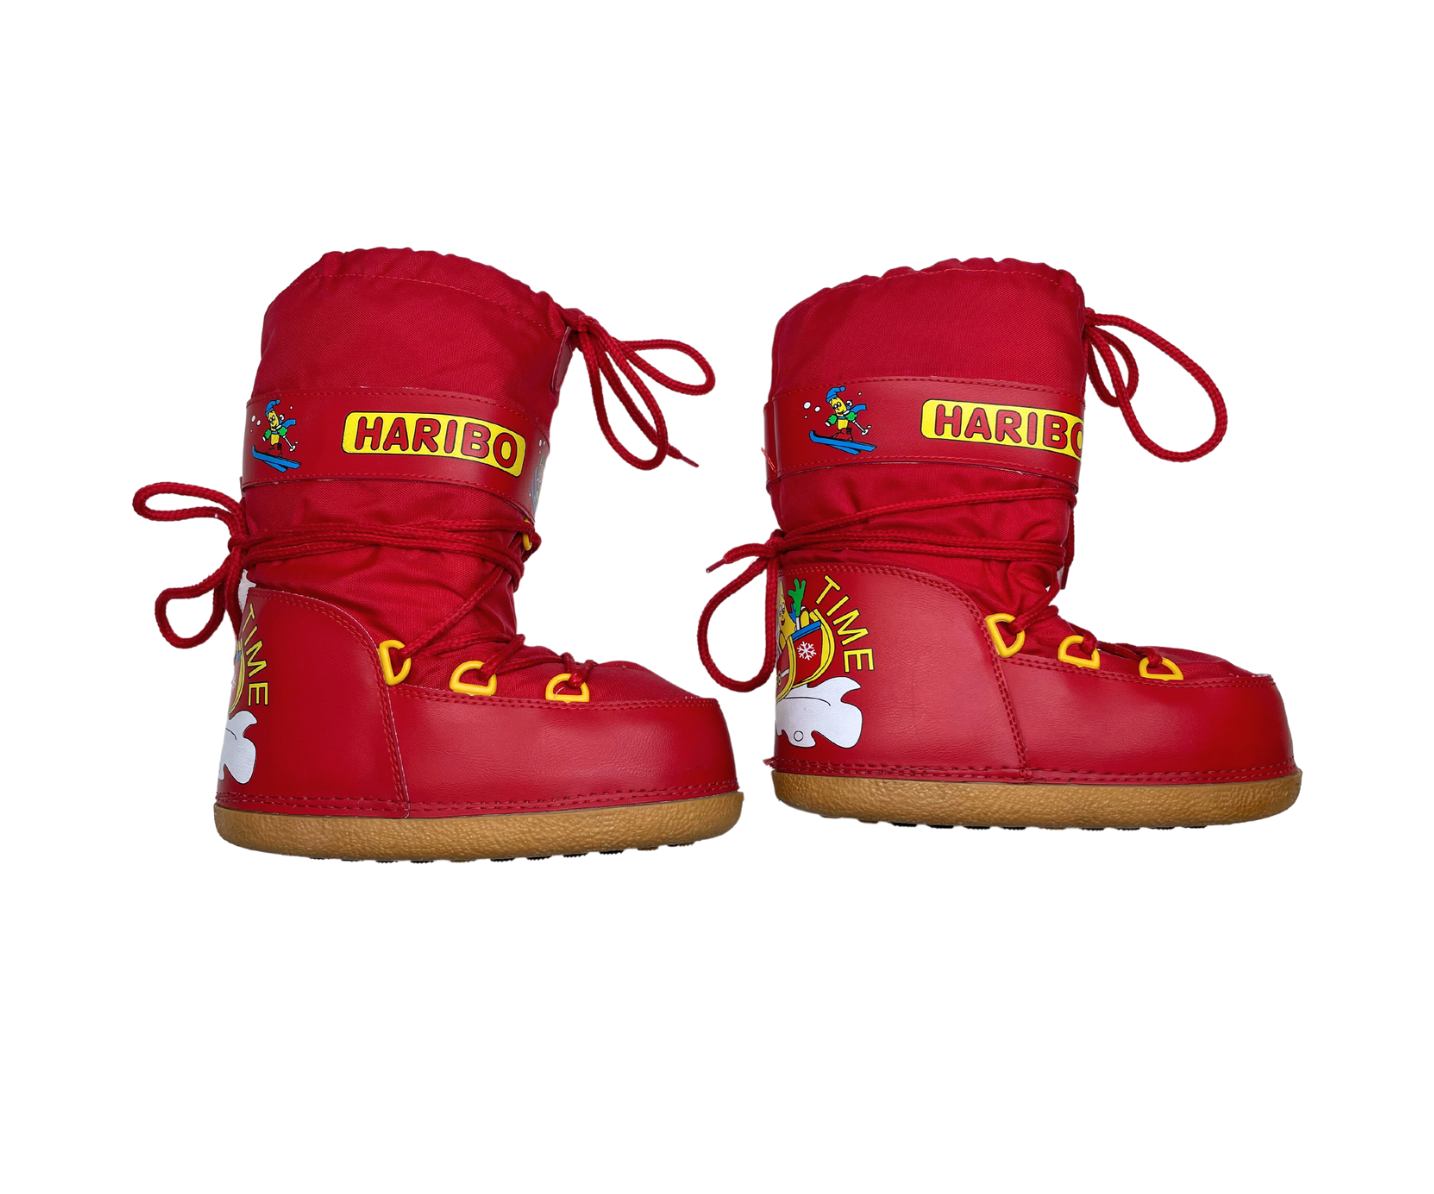 VINTAGE - Moon boots rouge Haribo - 32/34